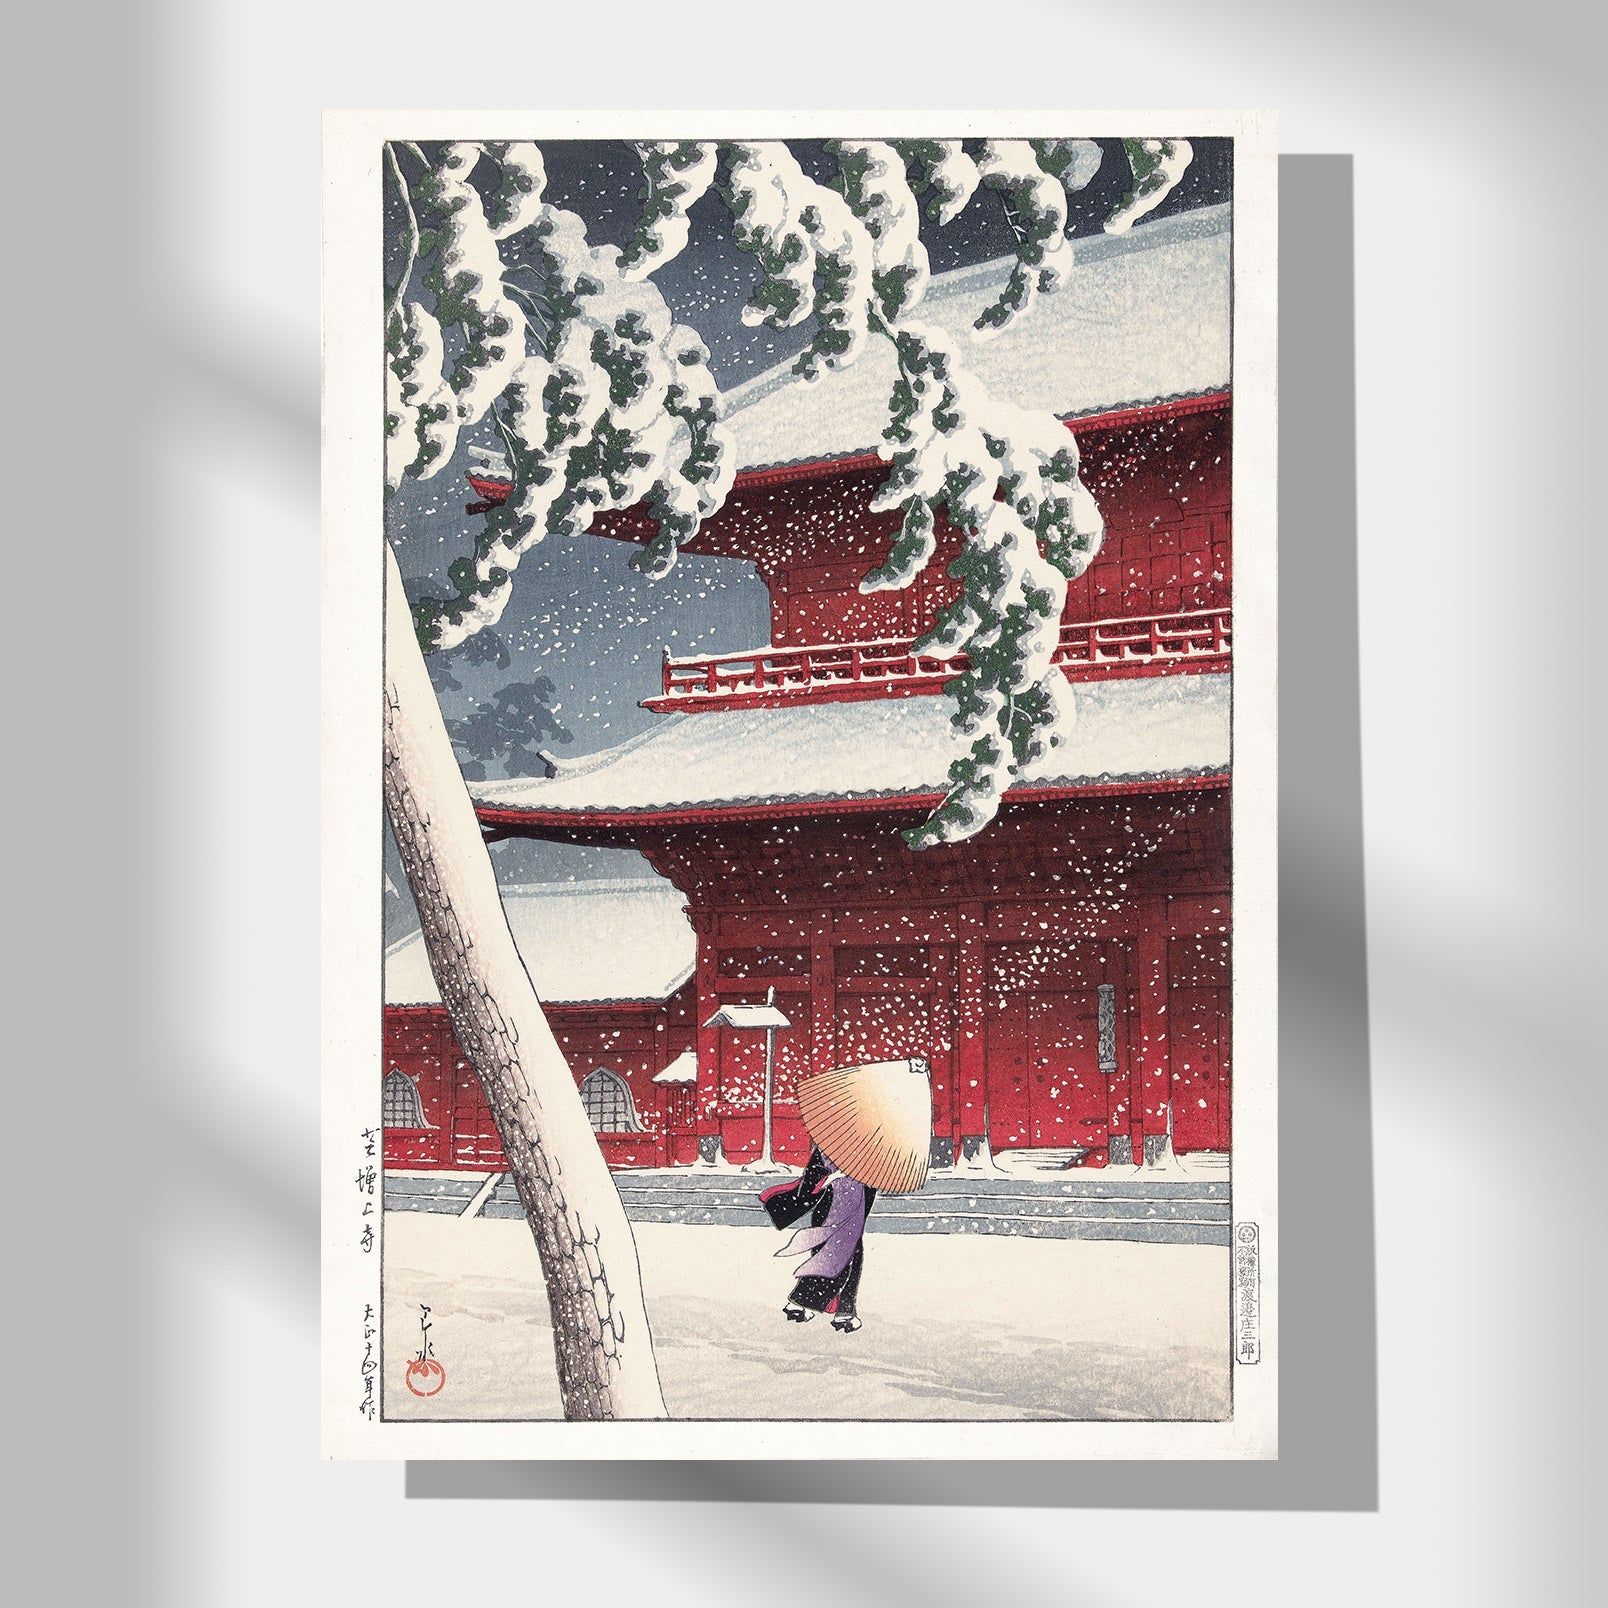 Japanese Art Poster by Kawase Hasui, depicting a woman walking in the snowstorm with an umbrella.